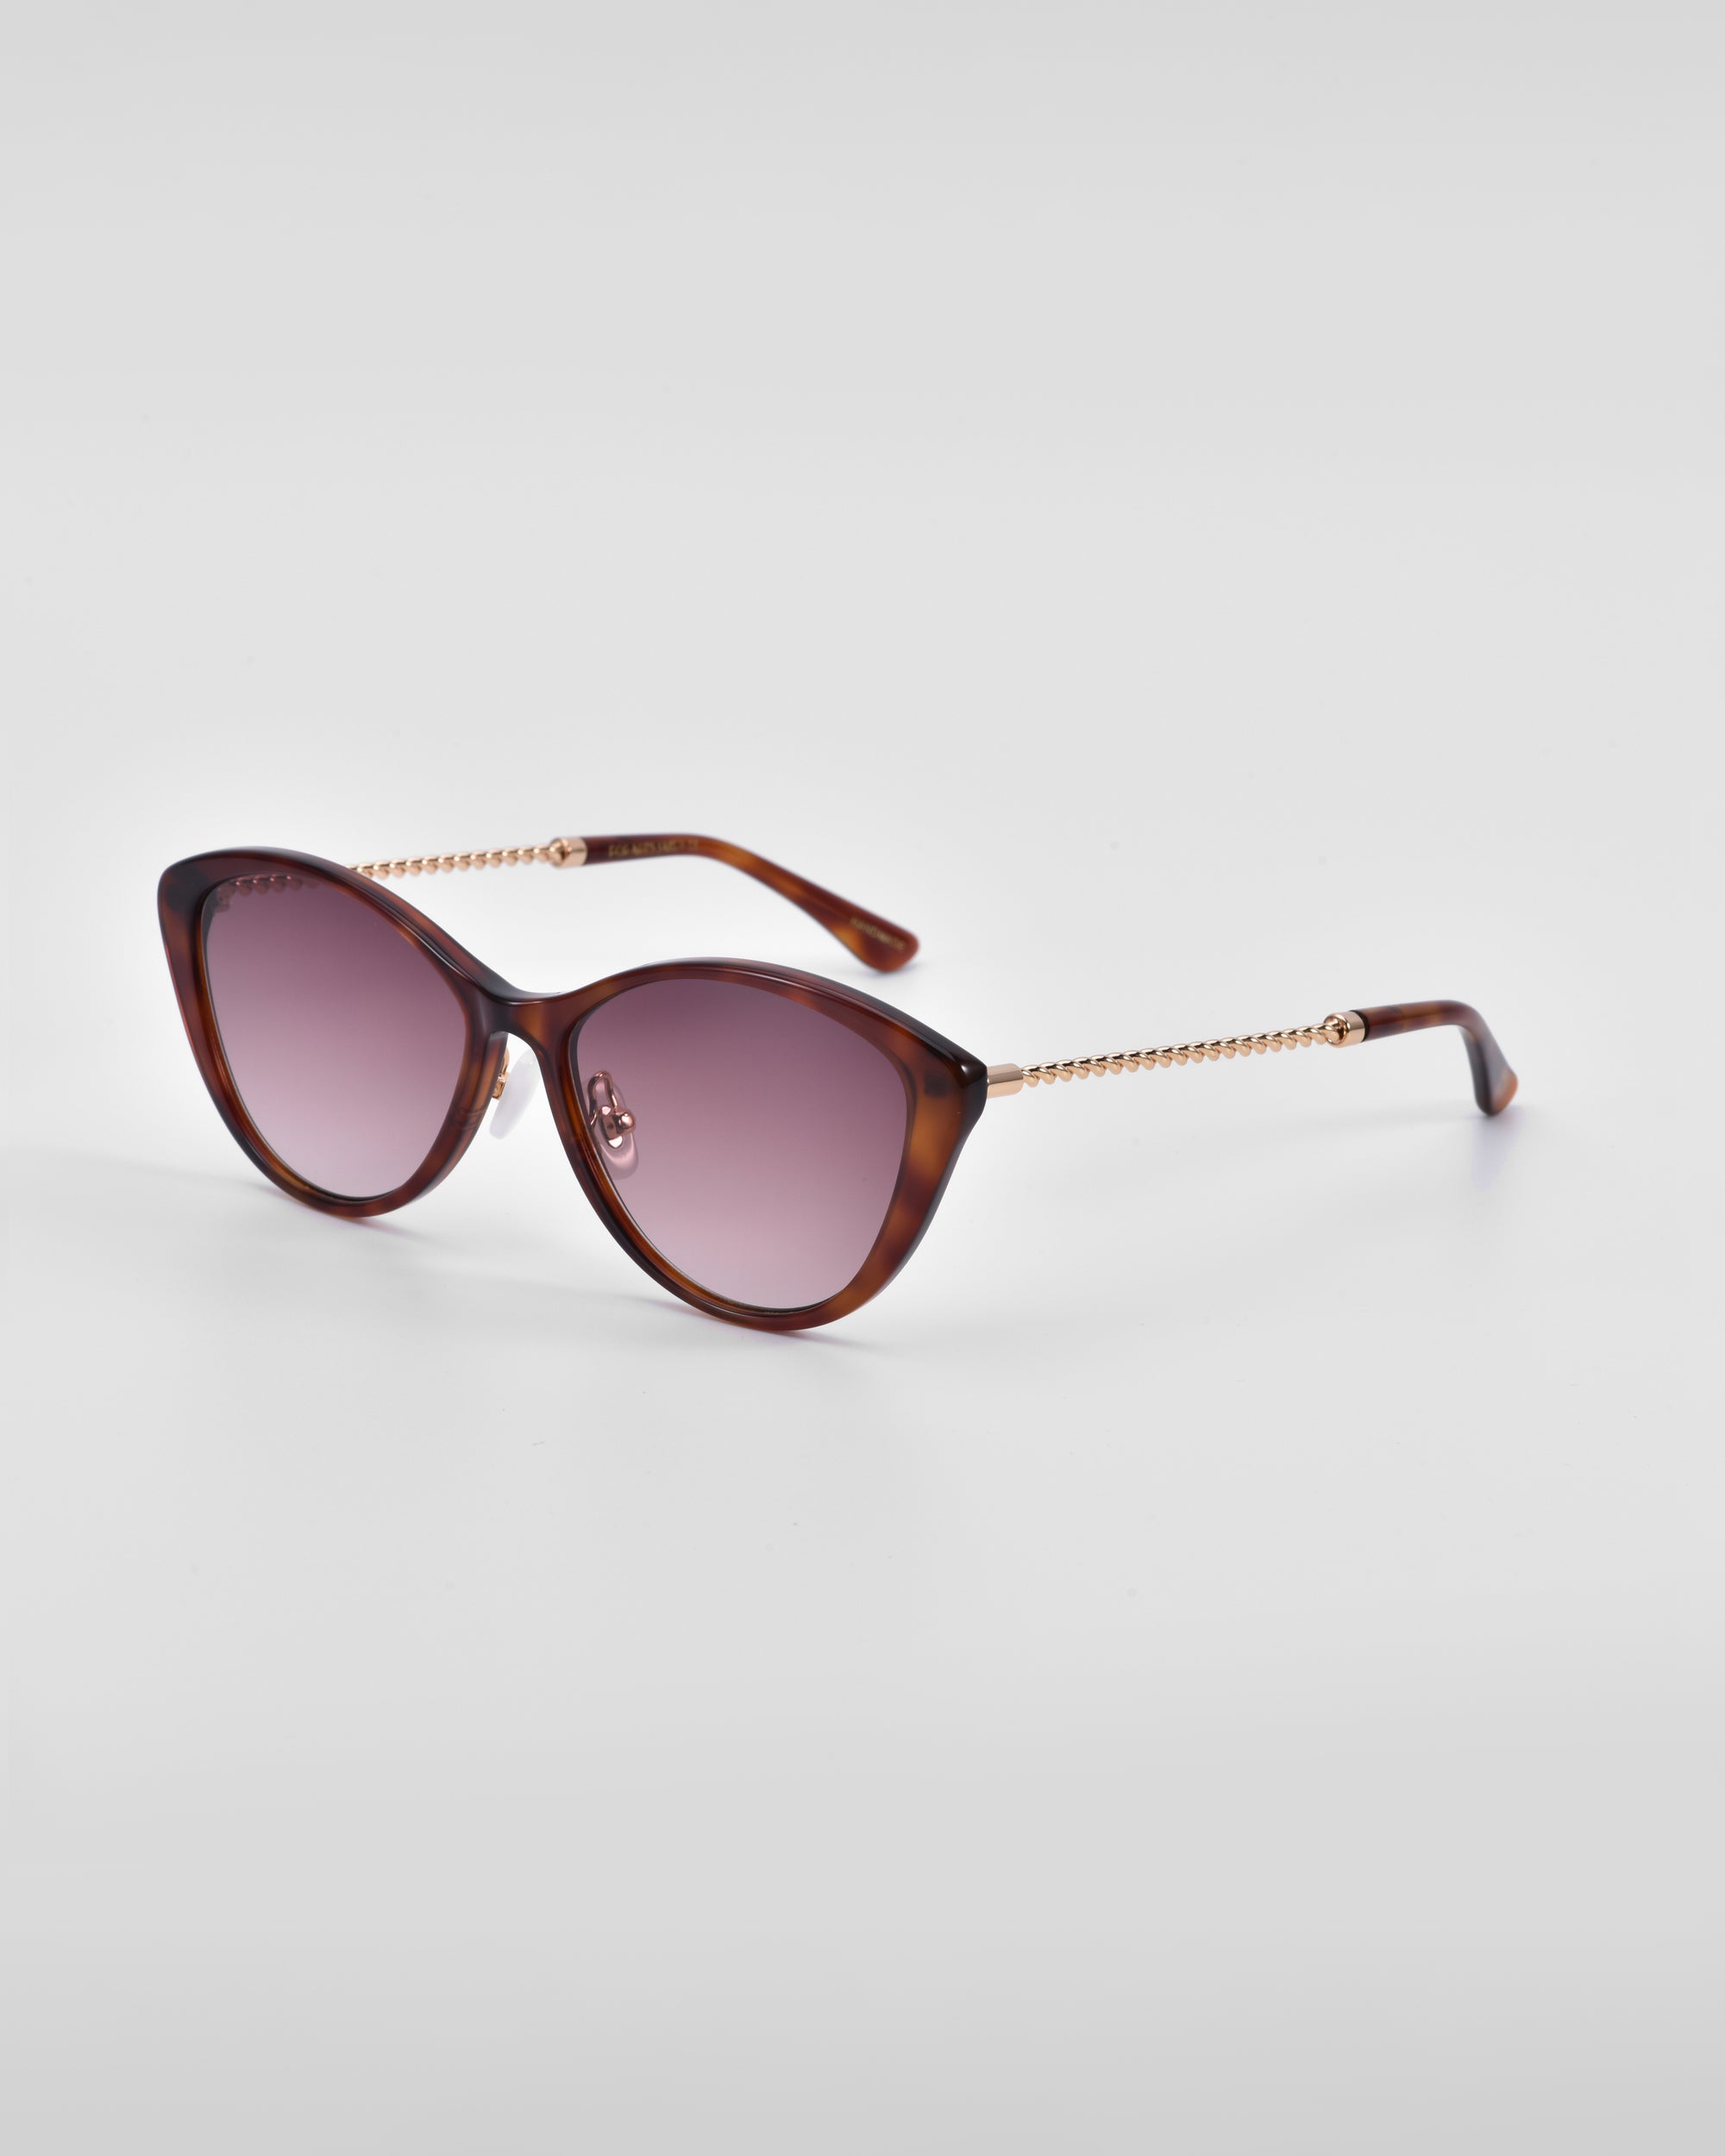 A pair of stylish sunglasses with dark earpieces and purple-tinted lenses. The frames are cat-eye shaped with a tortoiseshell pattern, and the arms feature a gold, chain-like design near the hinges. Jade-stone nose pads complete this elegant look against a plain white background. This is the Perla II by For Art&#39;s Sake®.